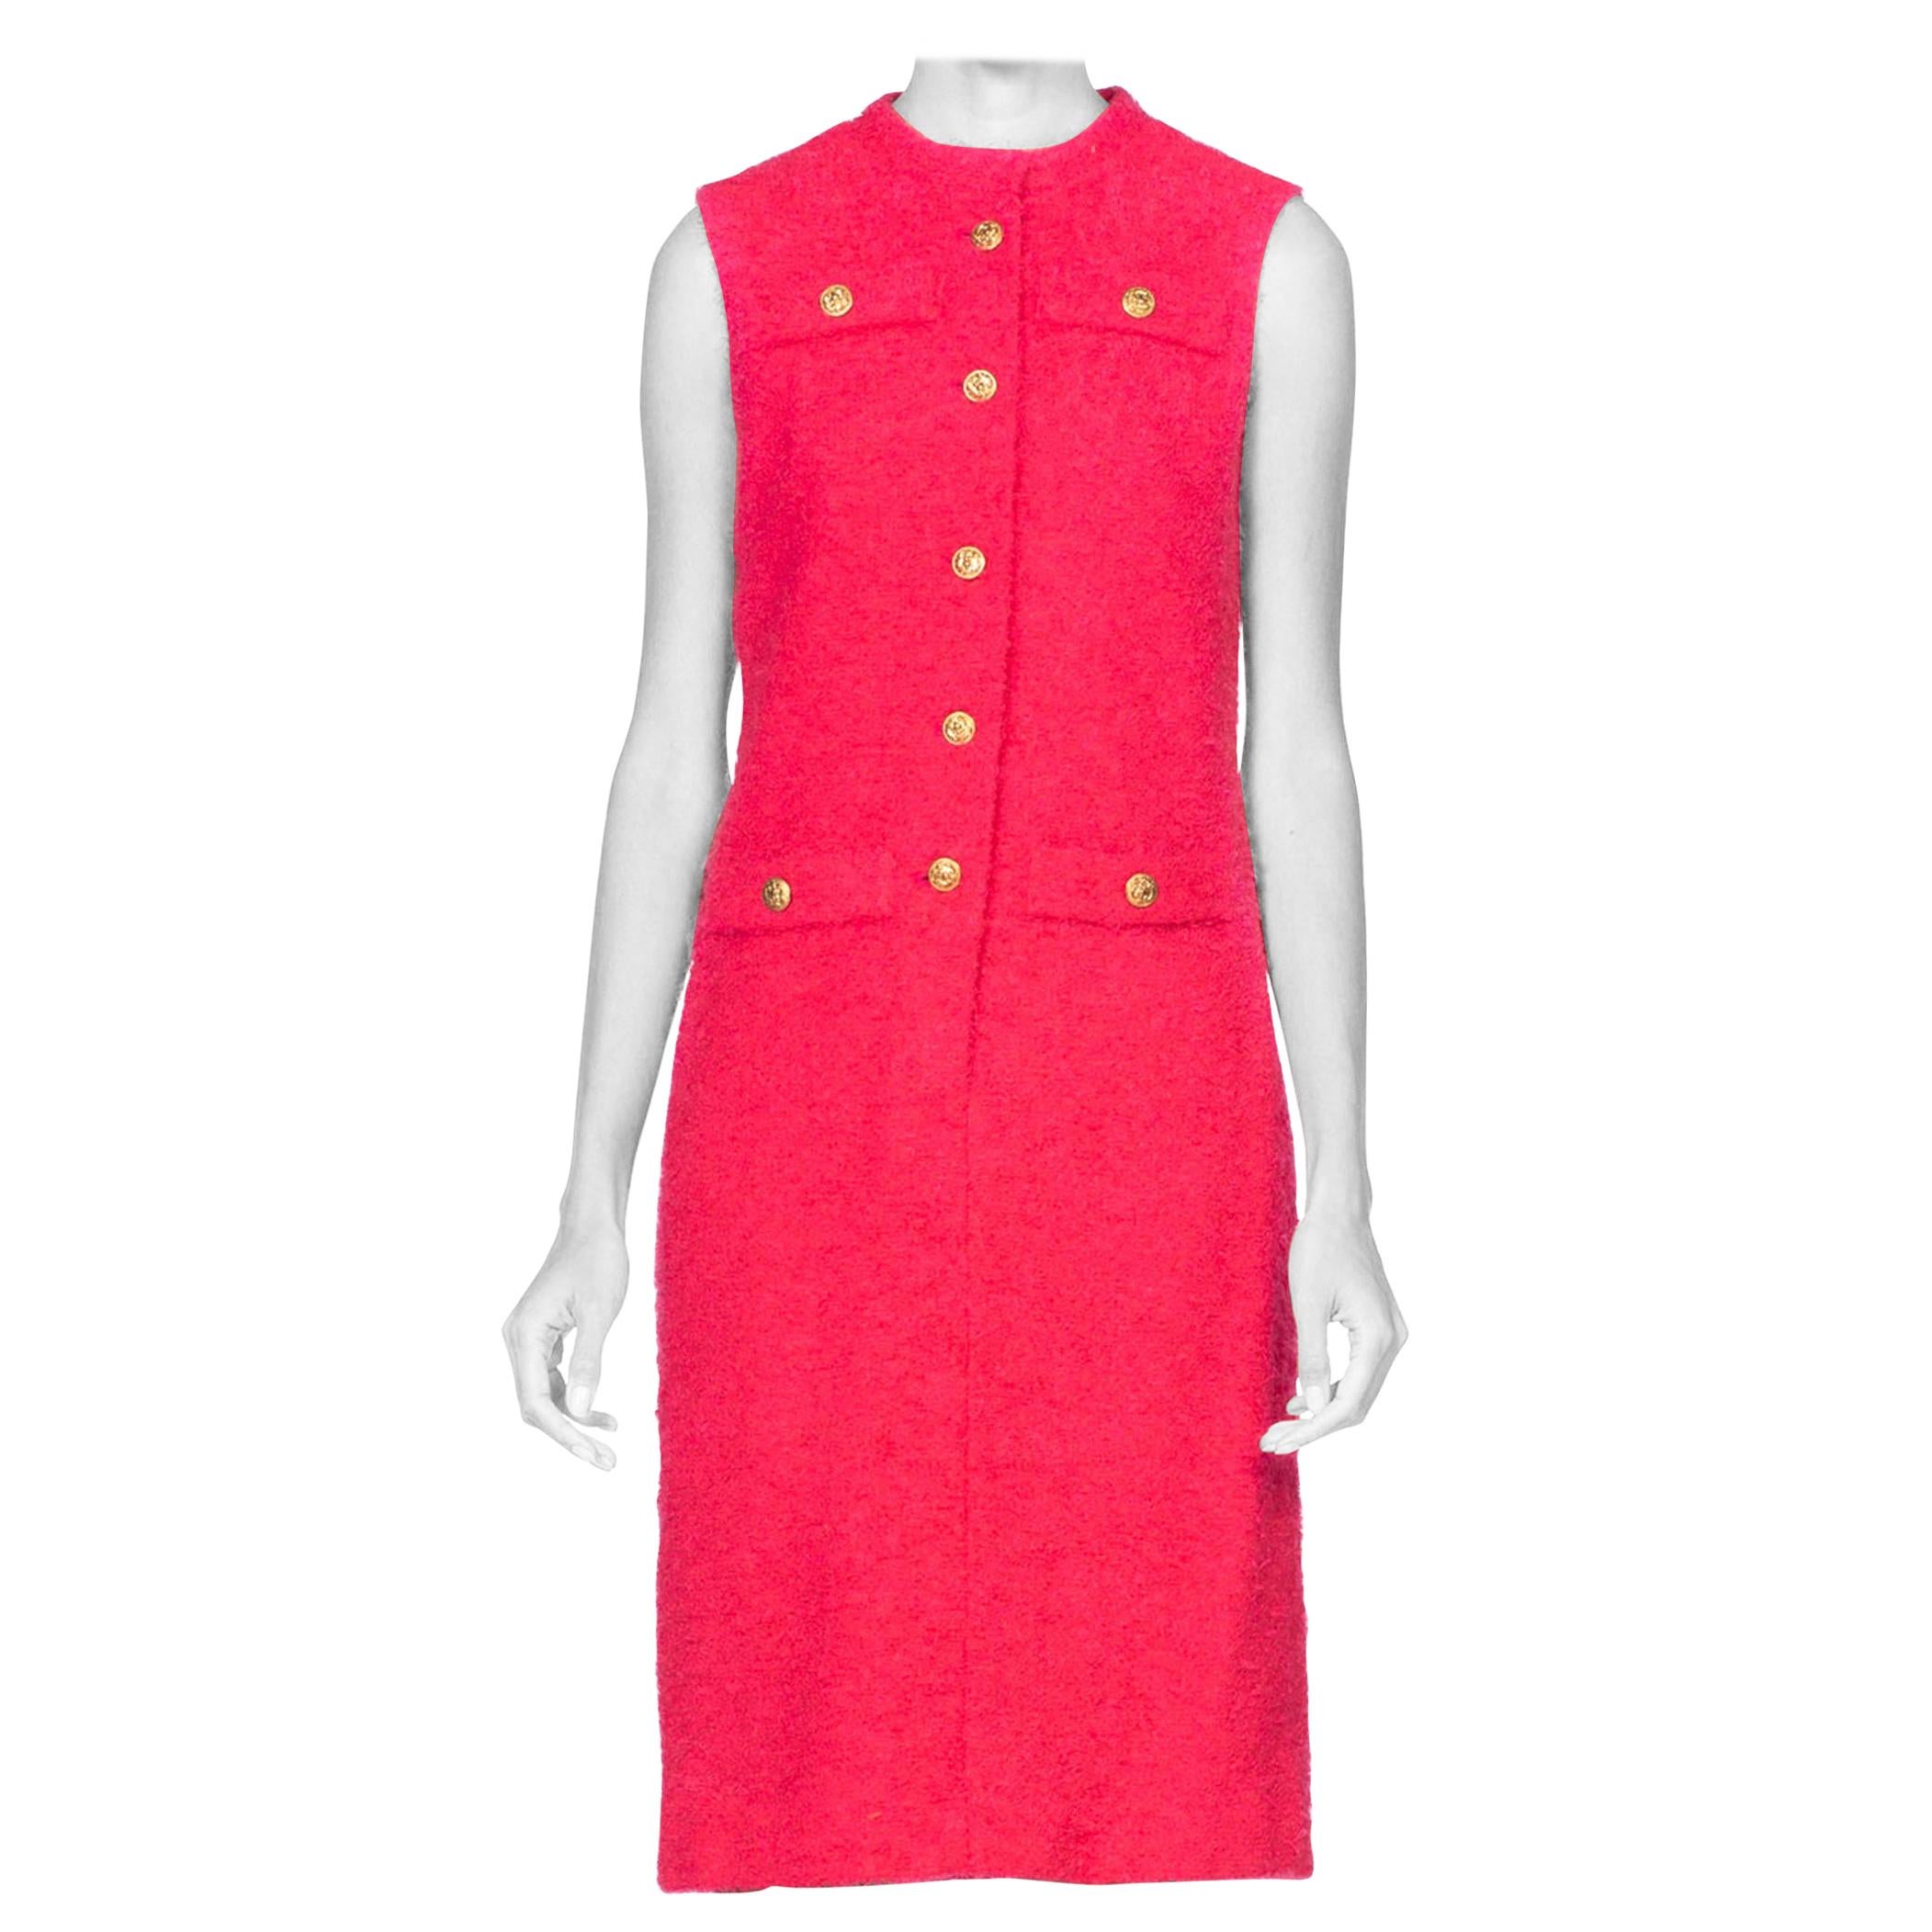 1960's Chanel Style Boucle Hot Pink Mod Dress With US Marines Buttons